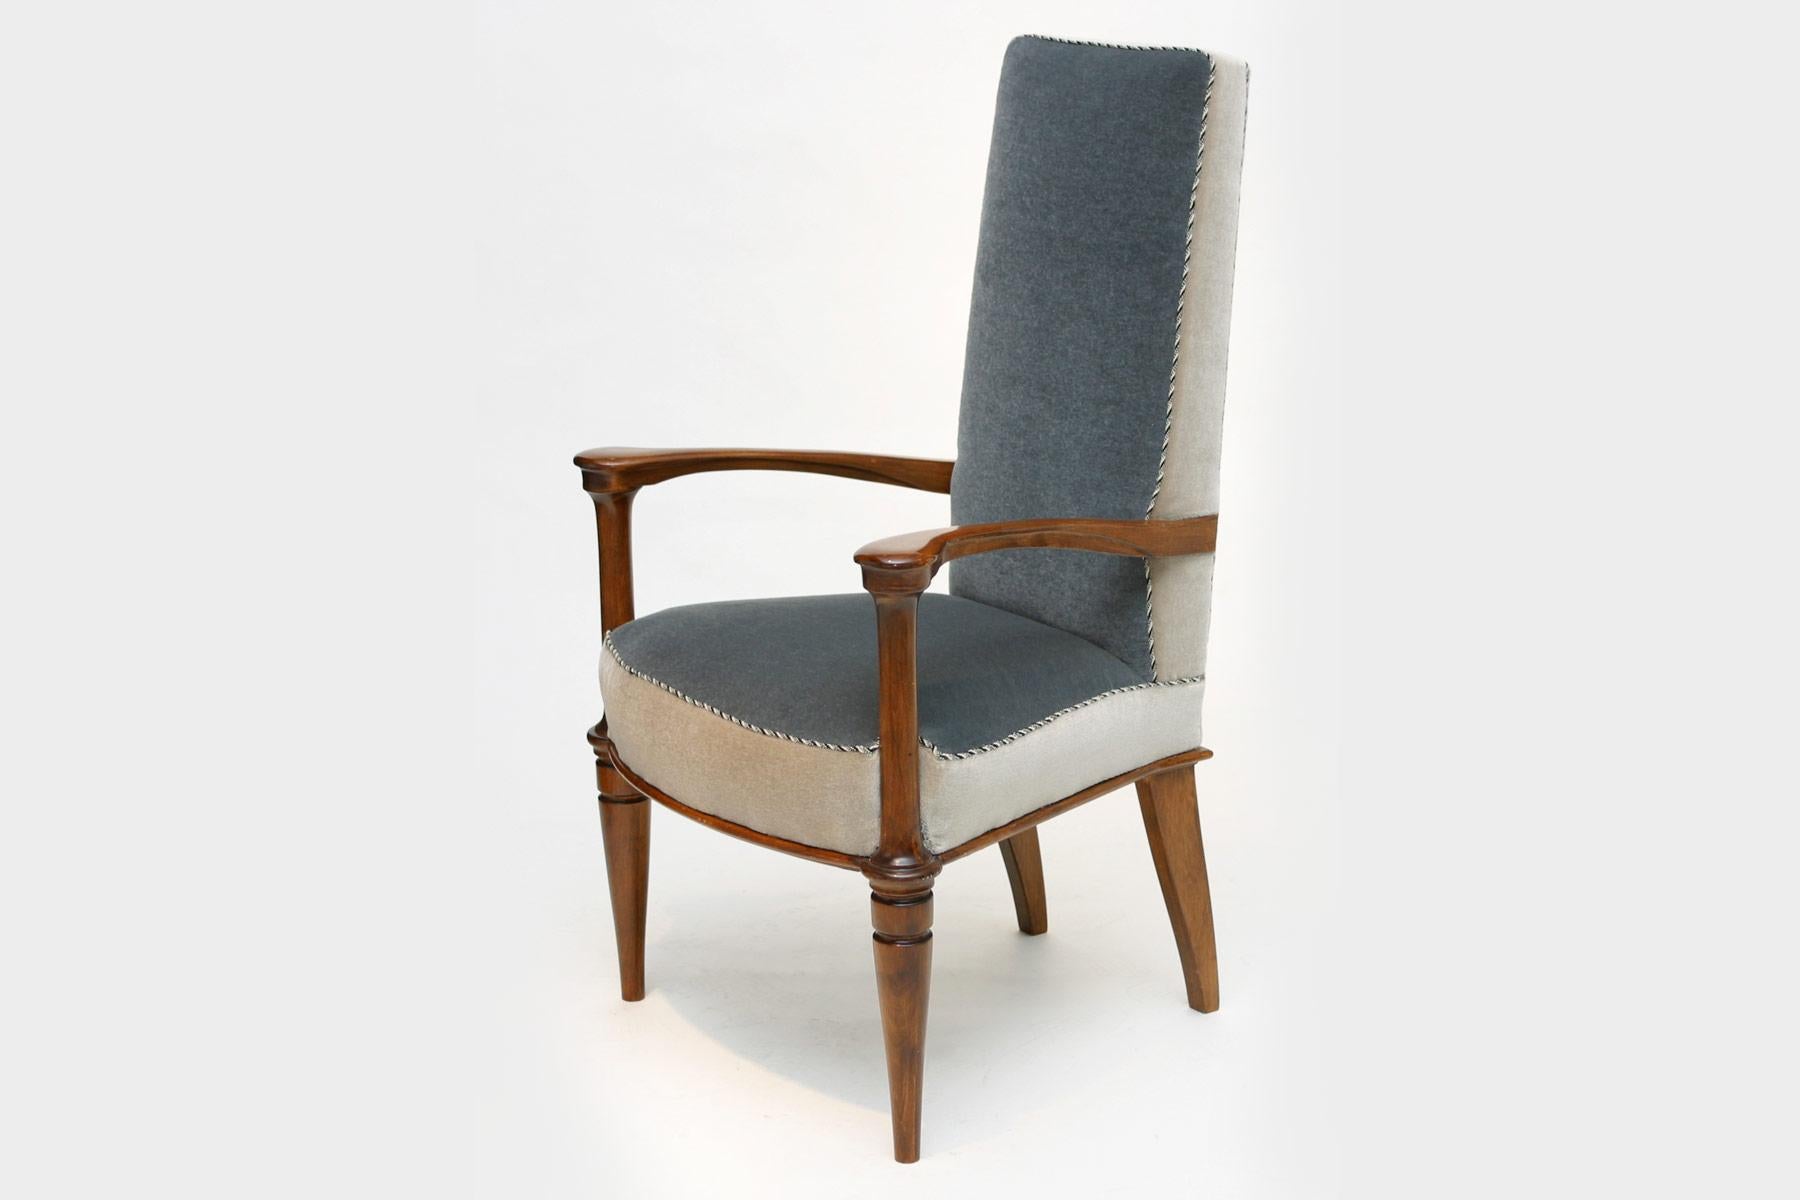 Custom Armchair in the style of Jules Leleu by Bourgeois Boheme Atelier
Custom Wood Finishing and Upholstery work included in the price of each chair.
Customer provides fabric (COM).